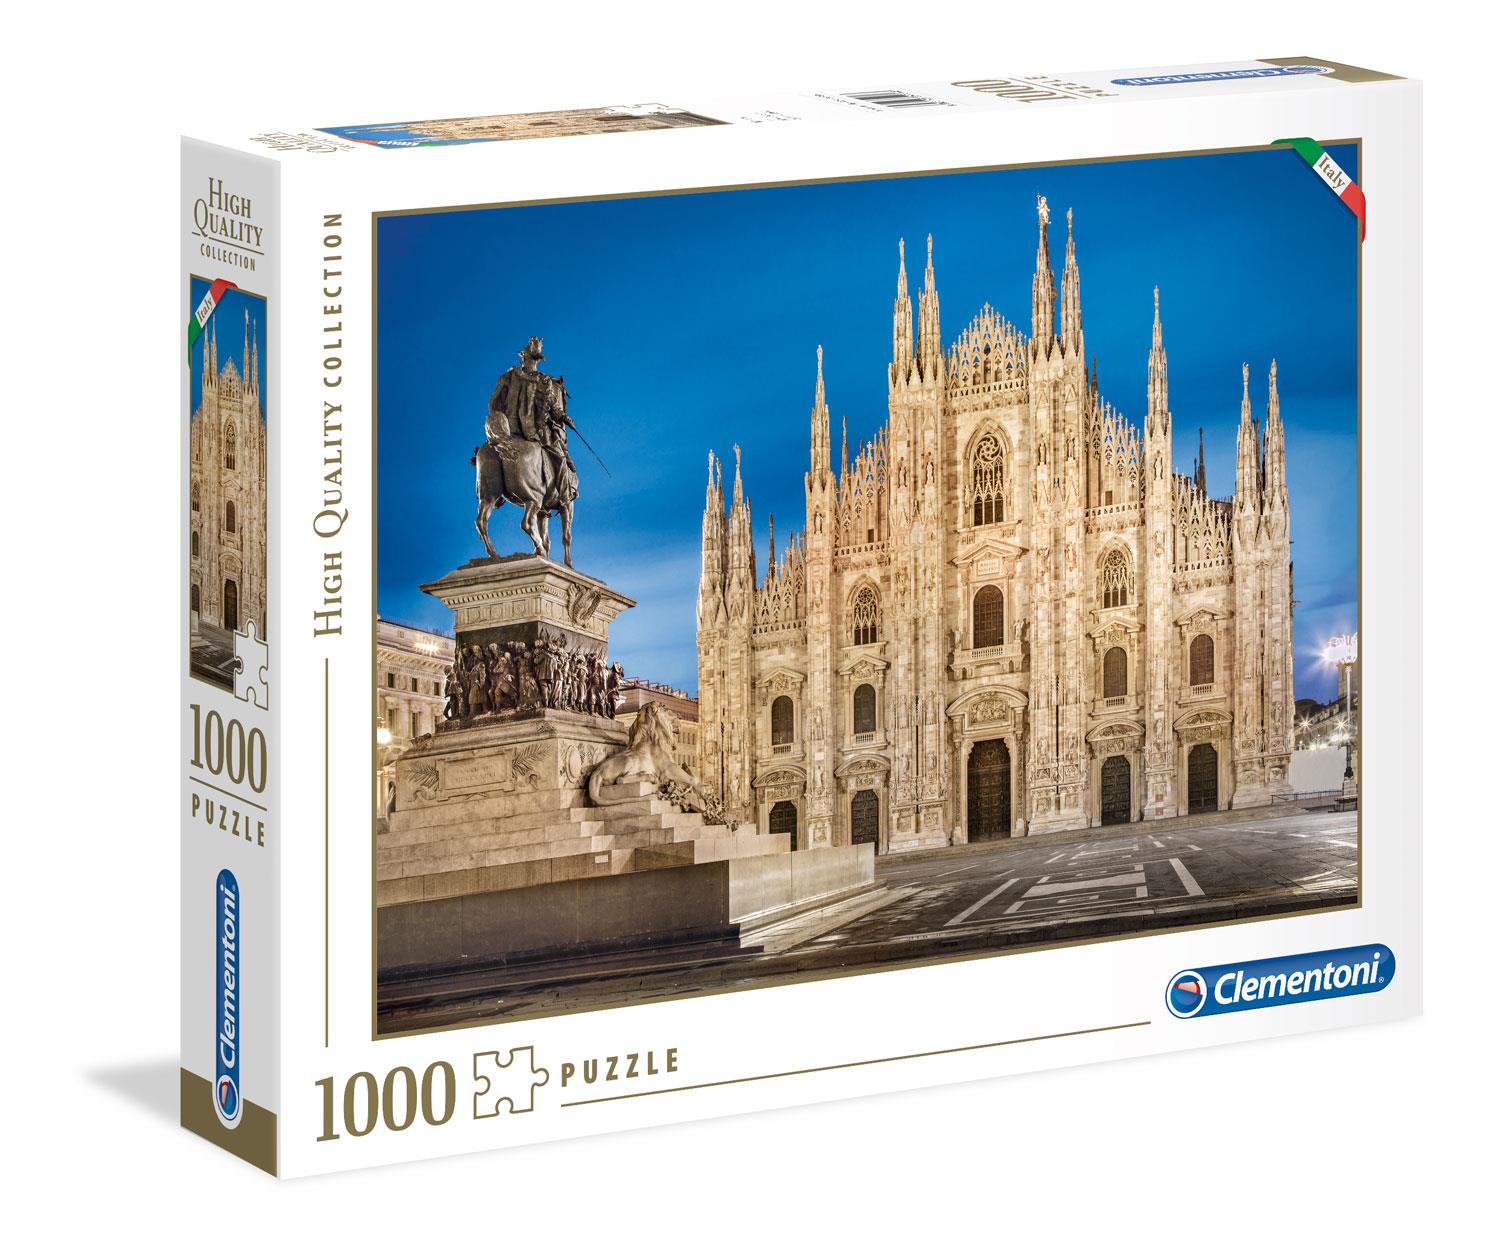 Clementoni Milan High Quality Jigsaw Puzzle (1000 Pieces)